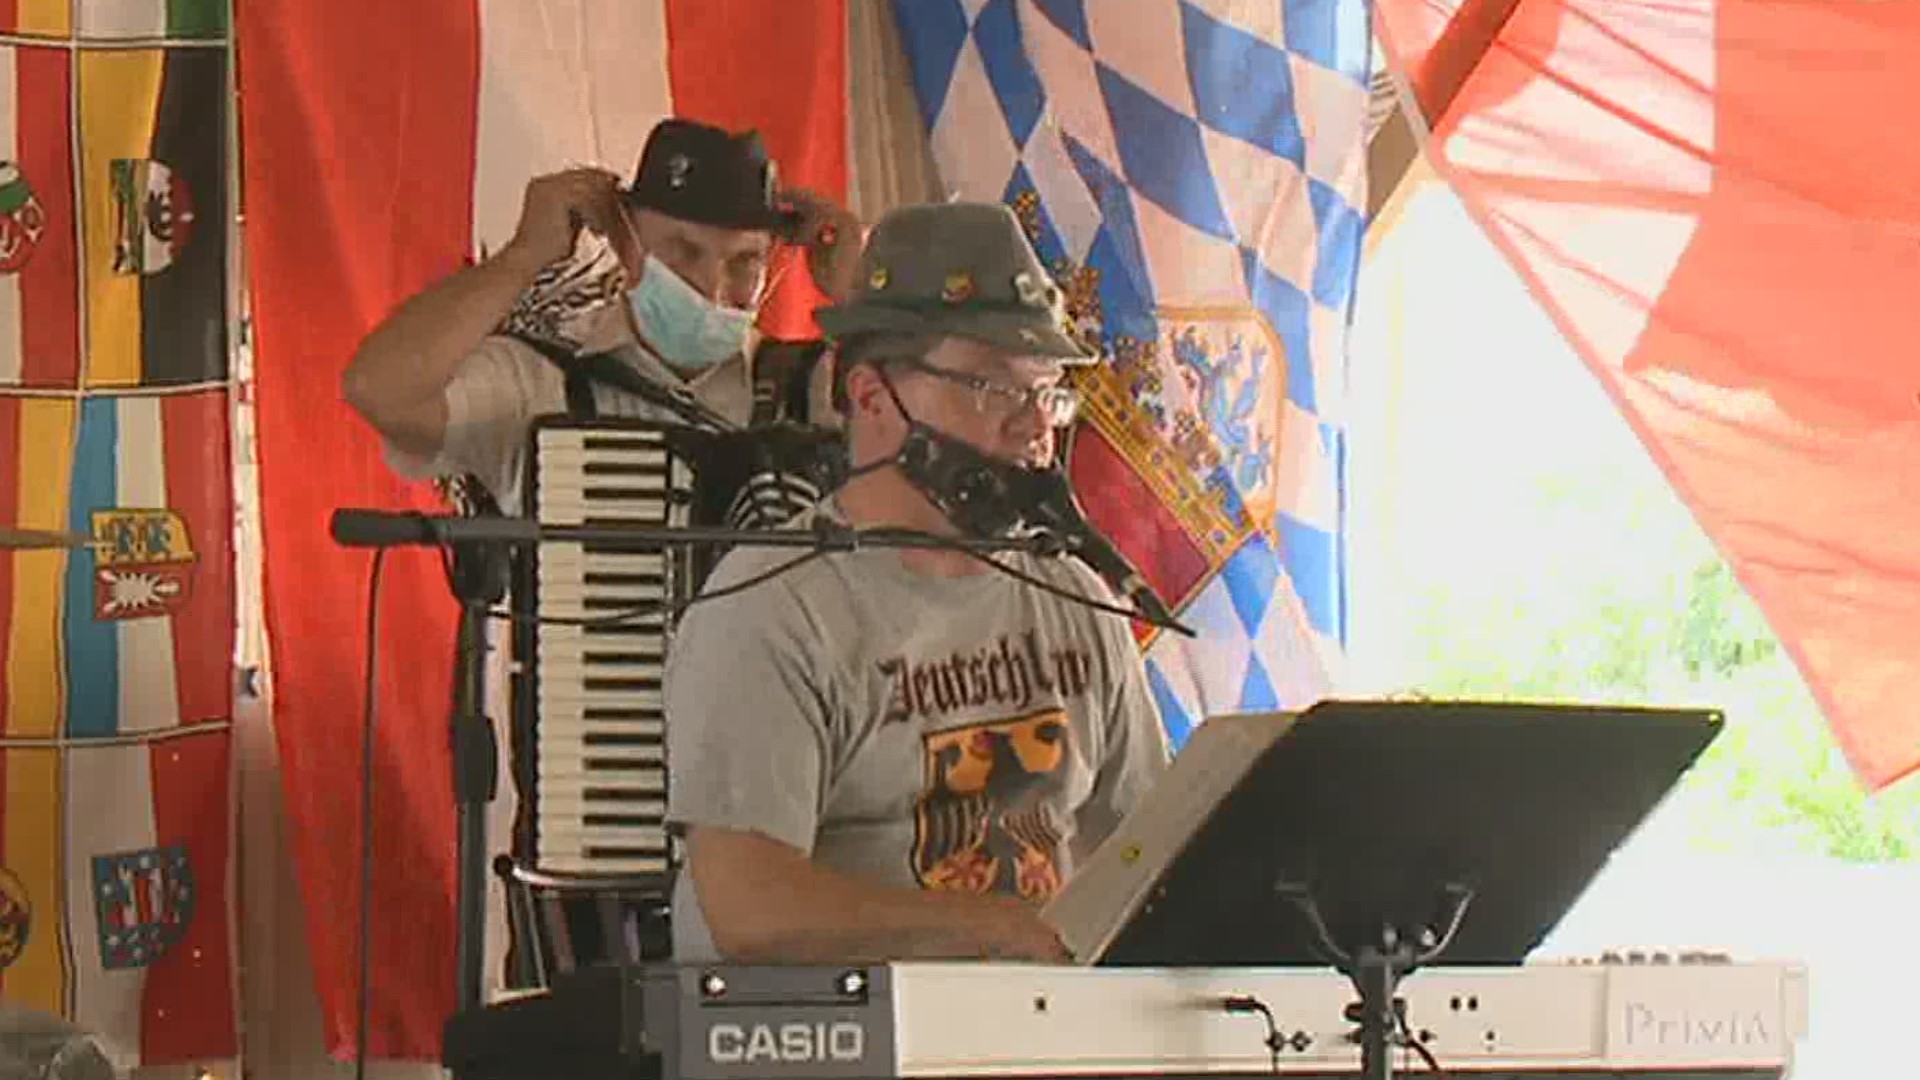 The Waldorf Park German American Federation held its 114th Annual German Day at its club Sunday.